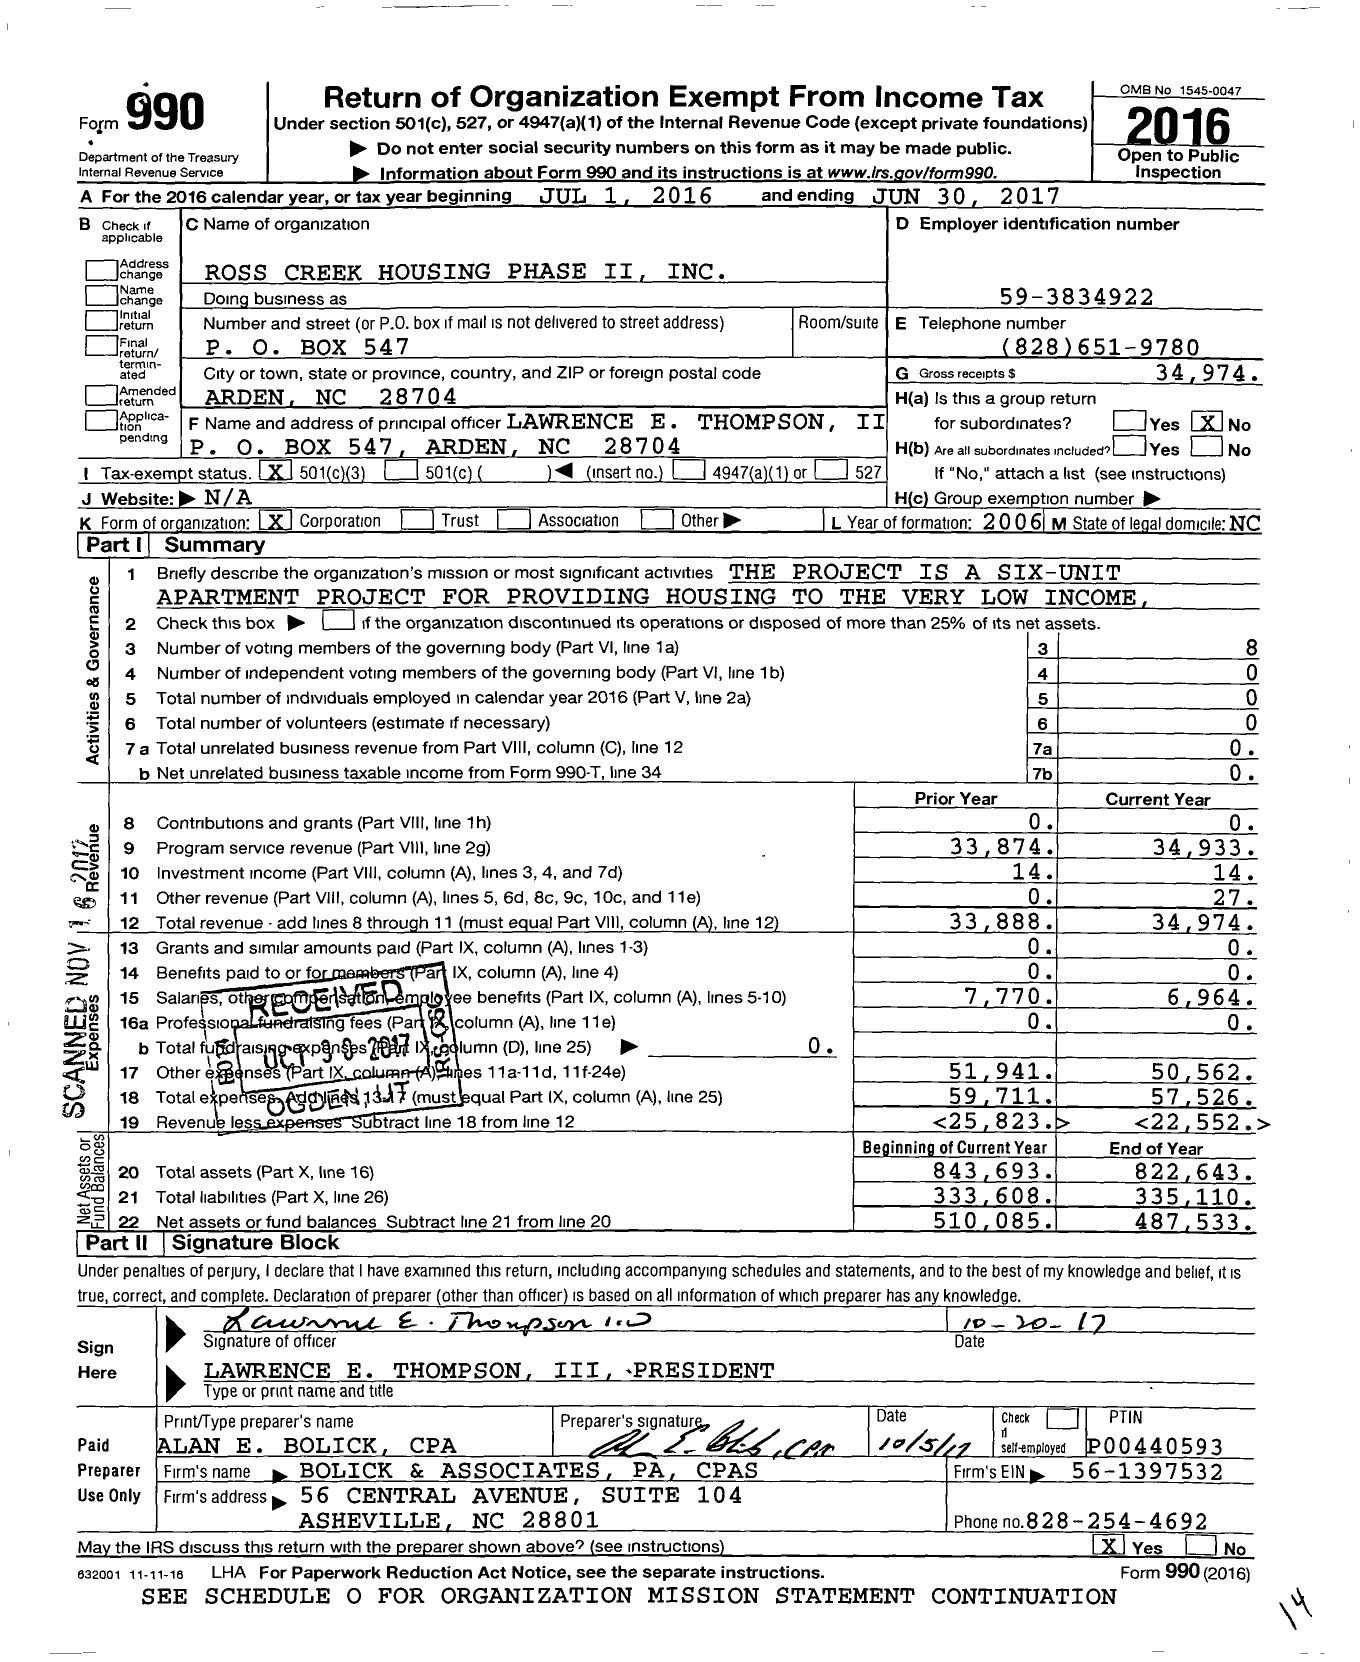 Image of first page of 2016 Form 990 for Ross Creek Housing Phase Ii